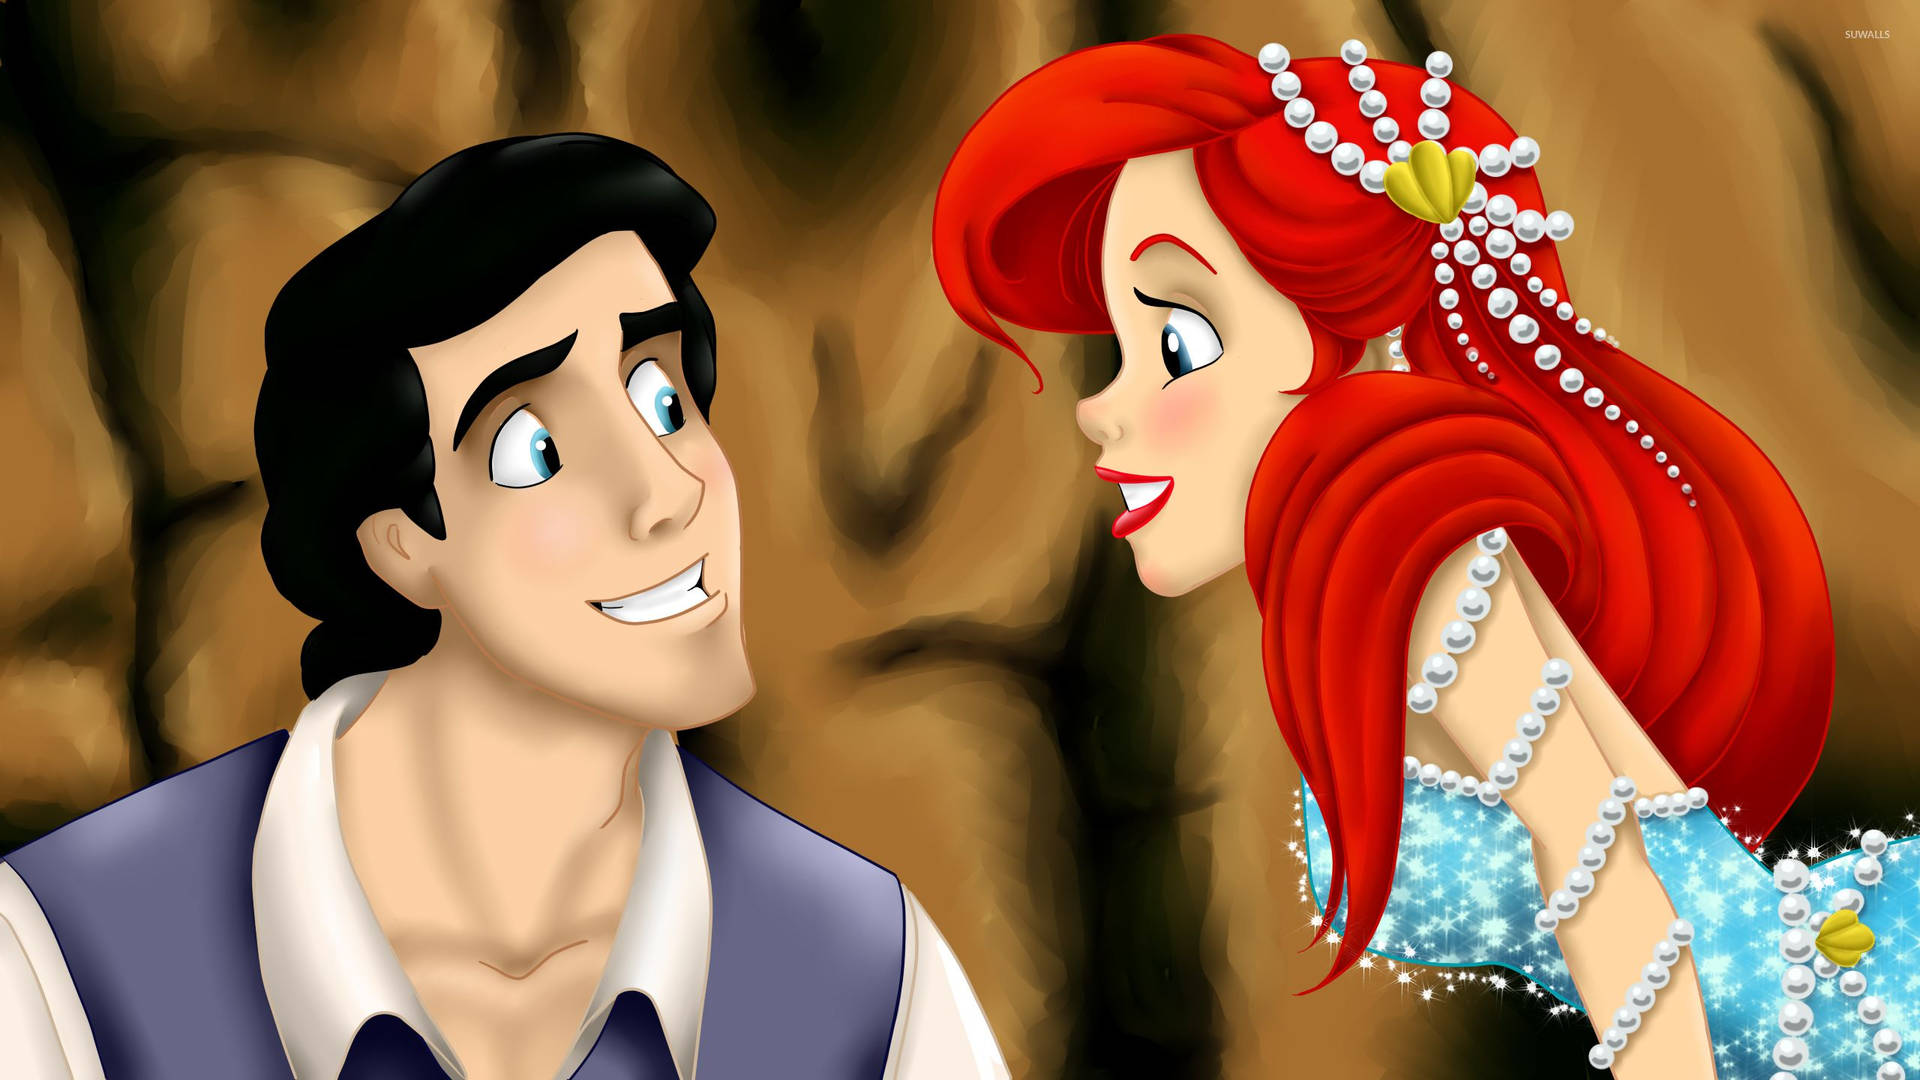 Prince Eric And Ariel The Little Mermaid Wallpaper